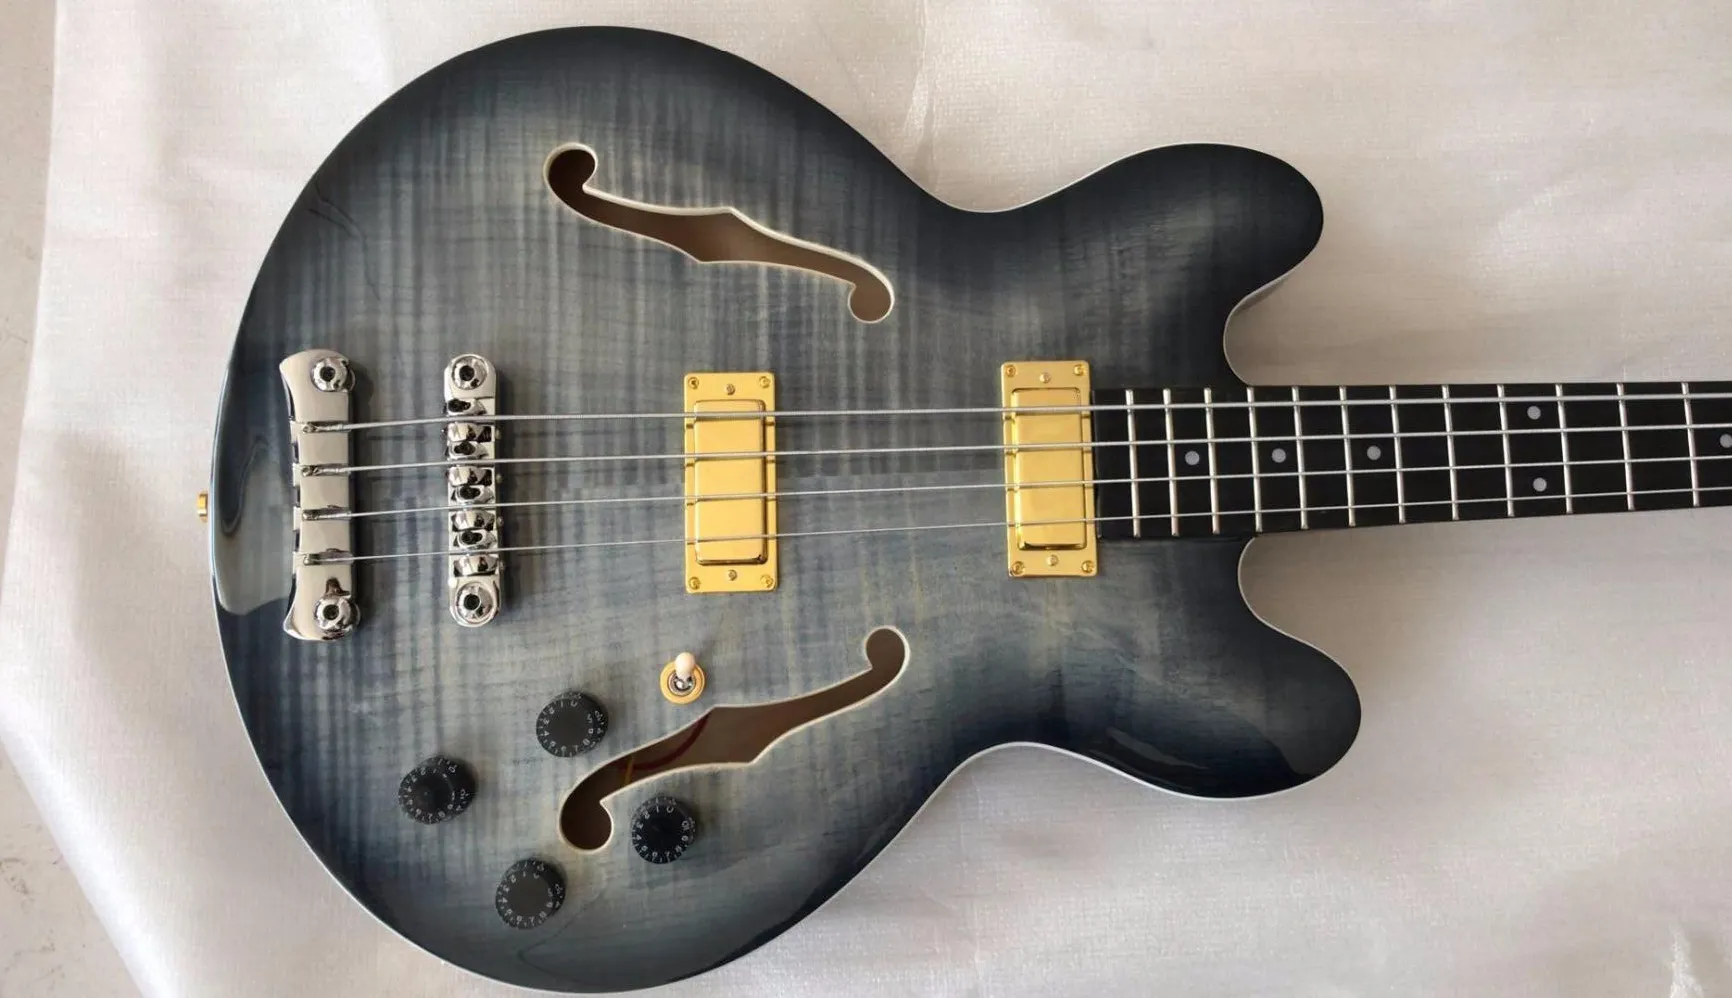 4 Strings Charcoal Black Burst Flame Maple Top Jazz Semi Hollow Body Bass Guitar Double F Hole, Dot Inlay, Gold Hardware